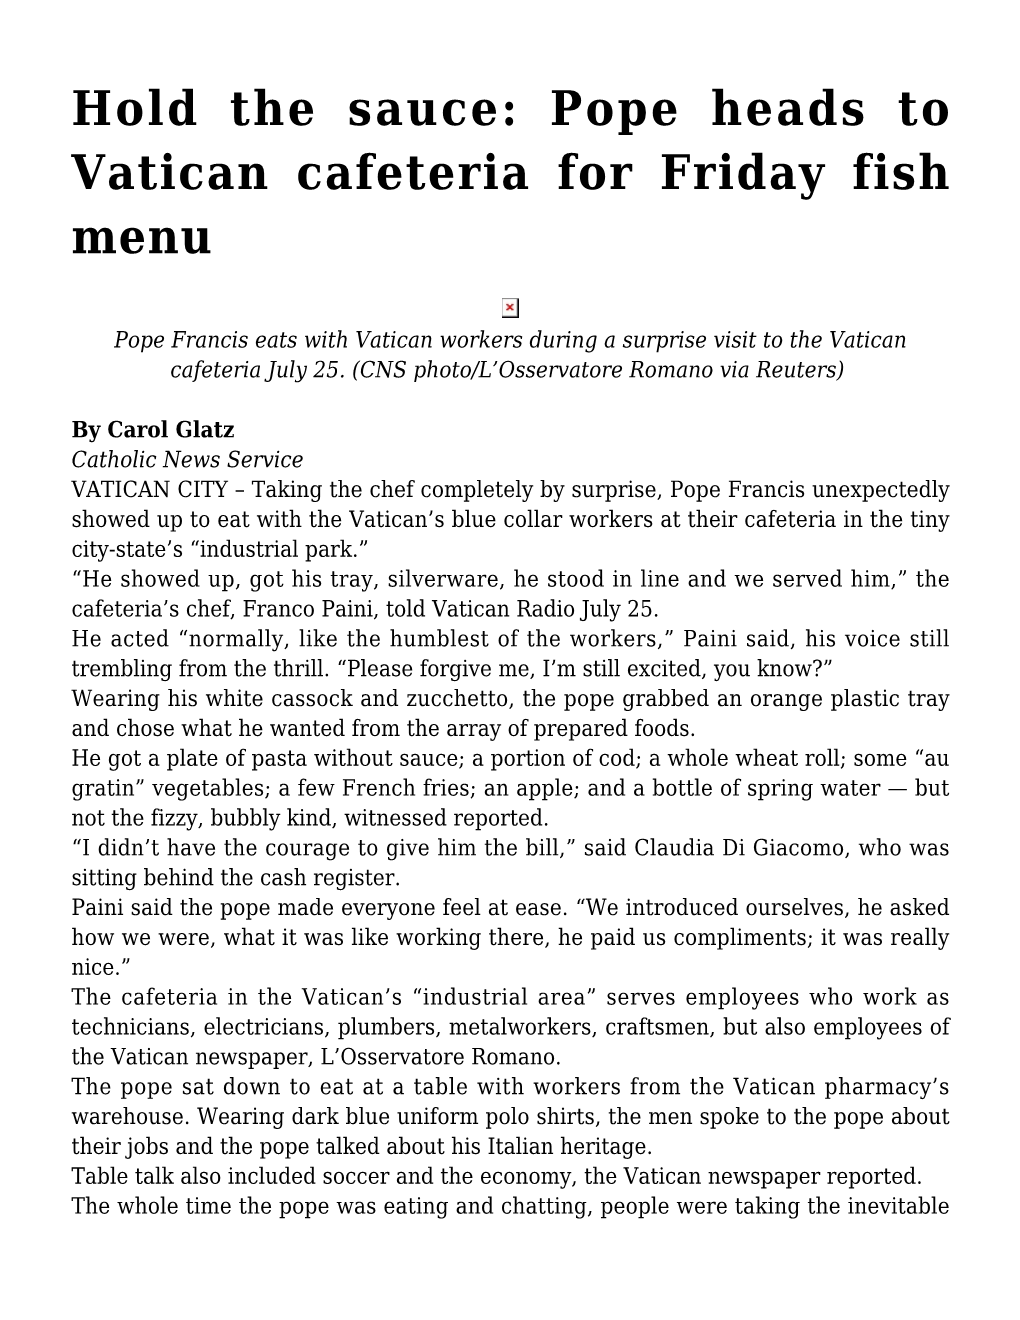 Hold the Sauce: Pope Heads to Vatican Cafeteria for Friday Fish Menu